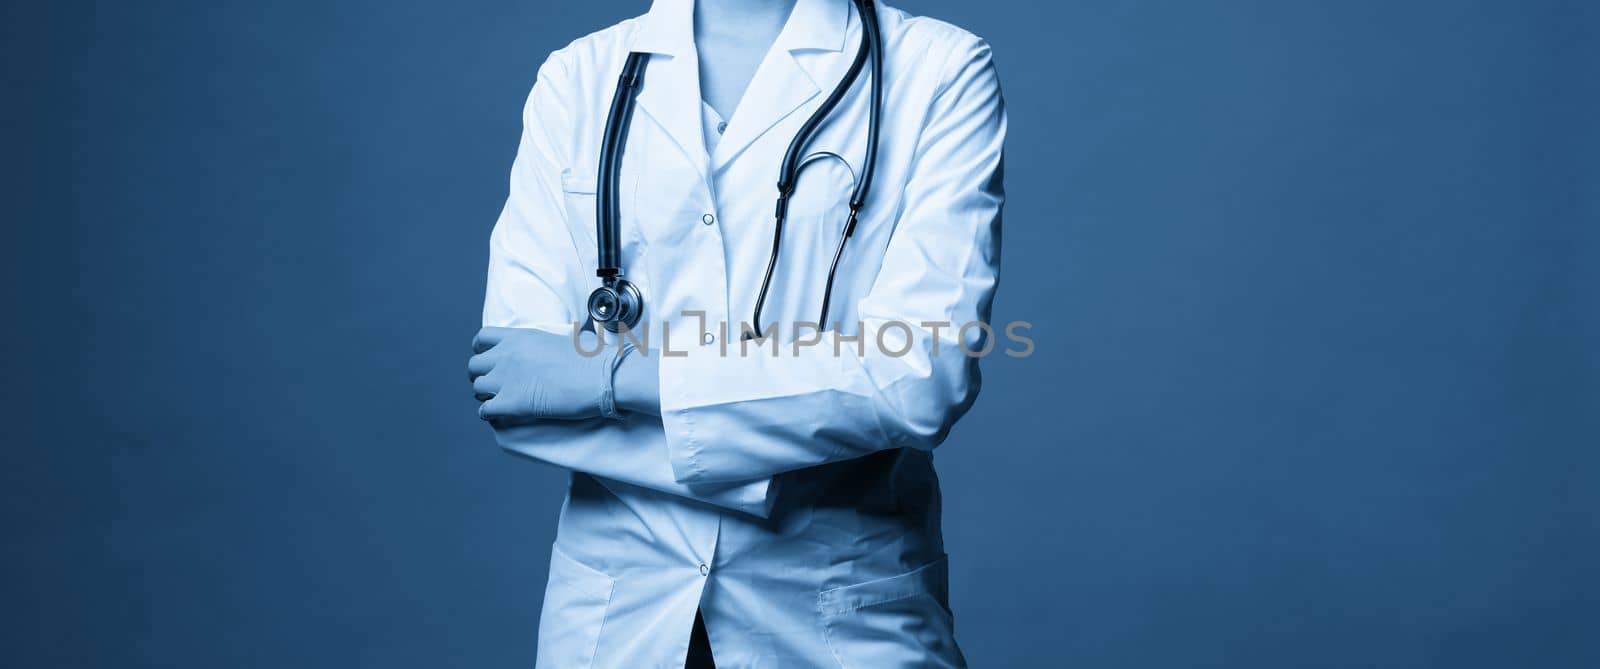 Young doctor with stethoscope against dark blue background, studio shot with copy space by Mariakray